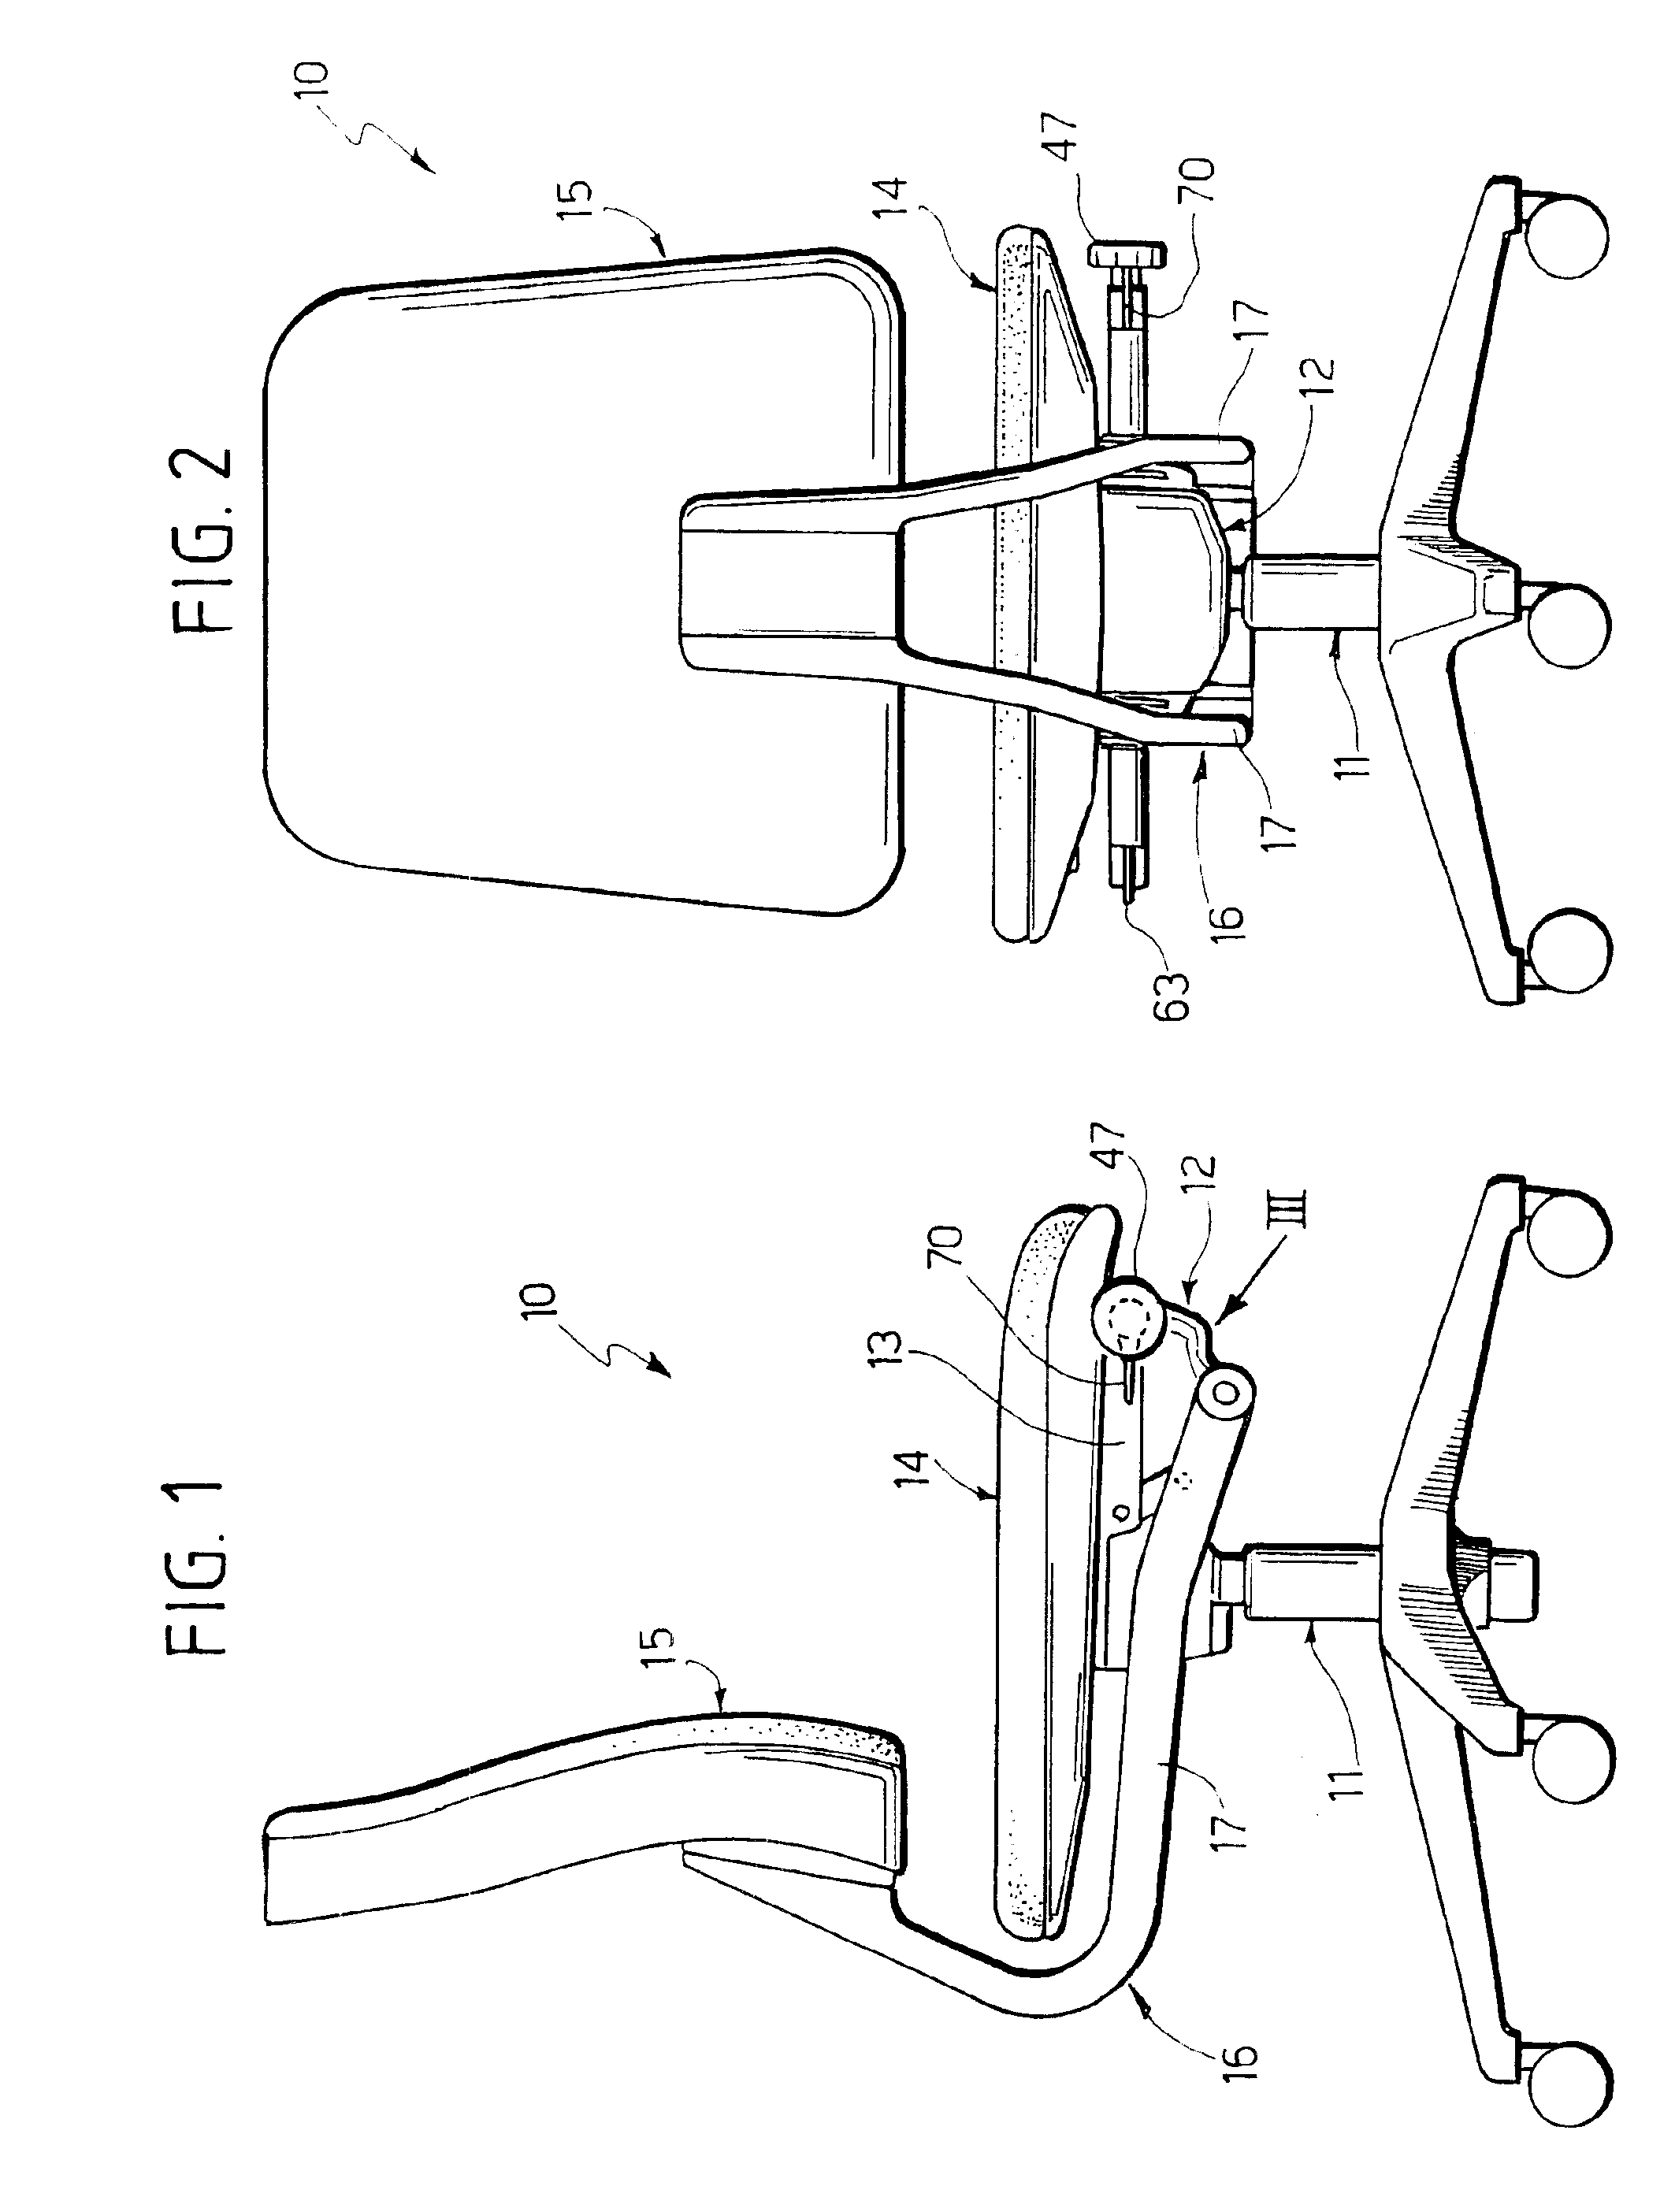 Chair with oscillating seat